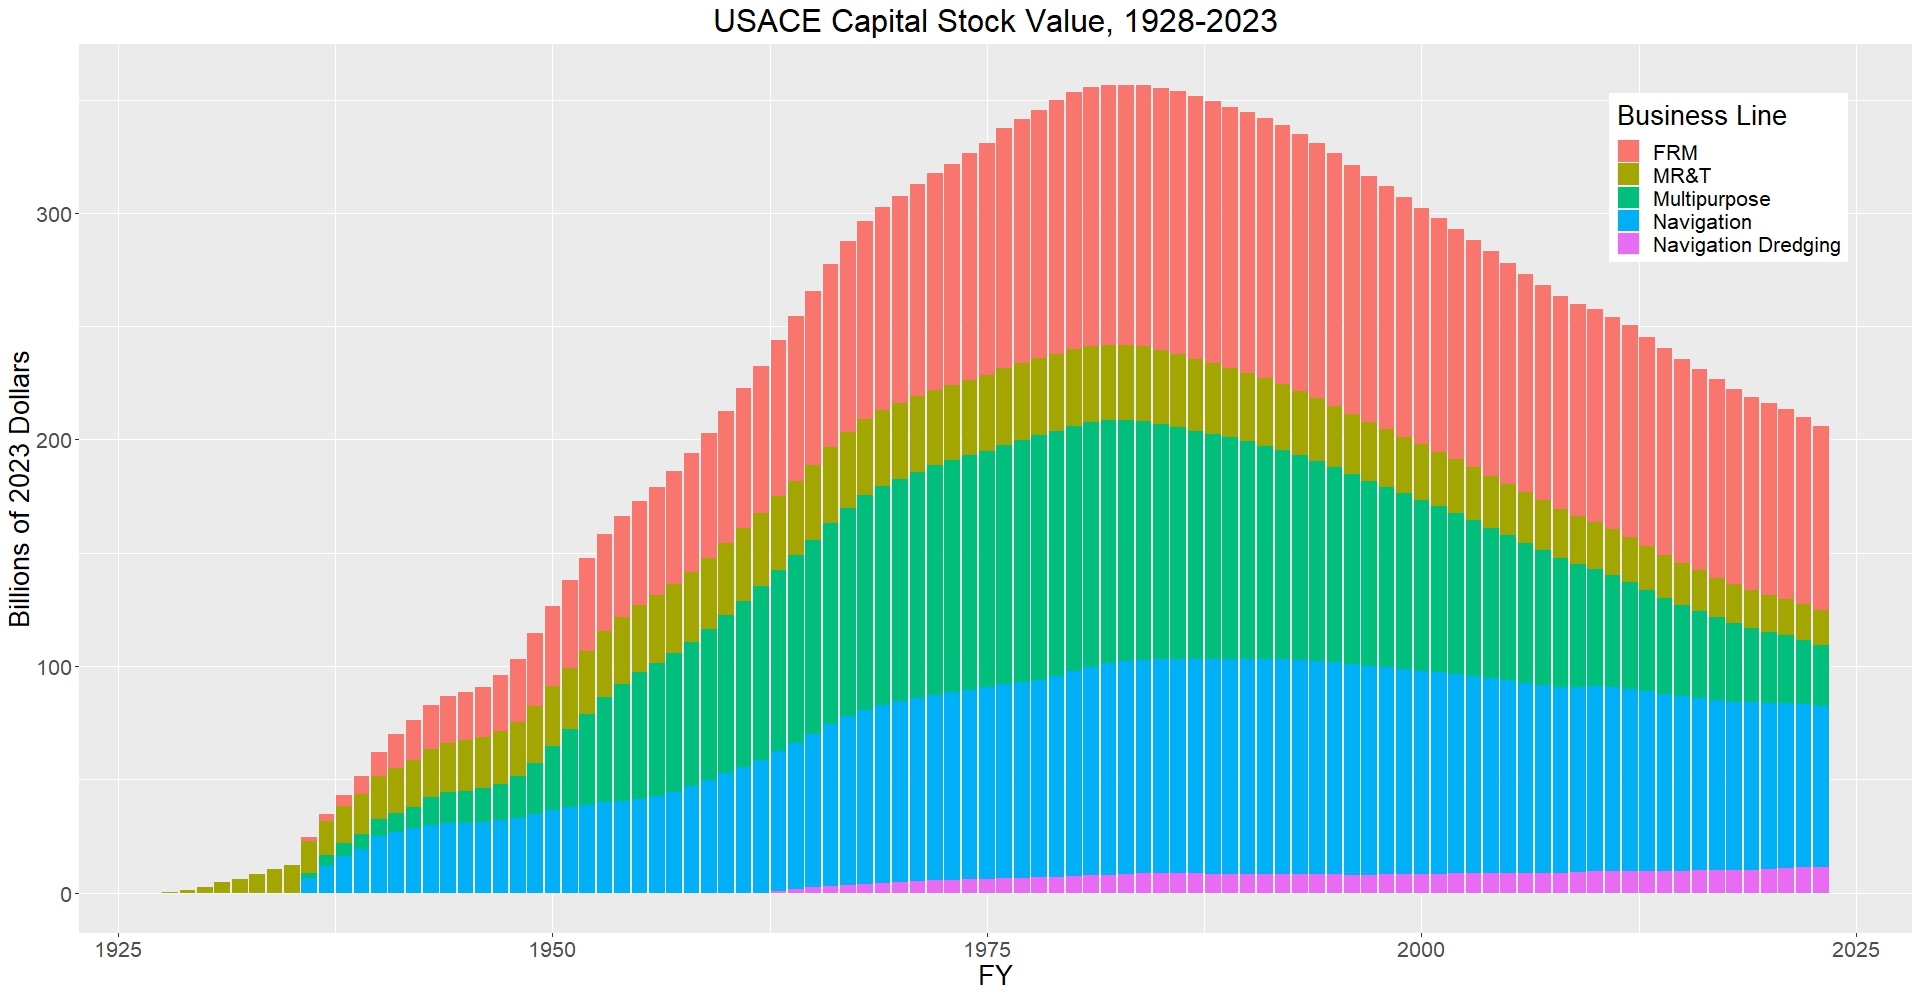 Graphic of USACE Capital Stock Value, 1928-2023